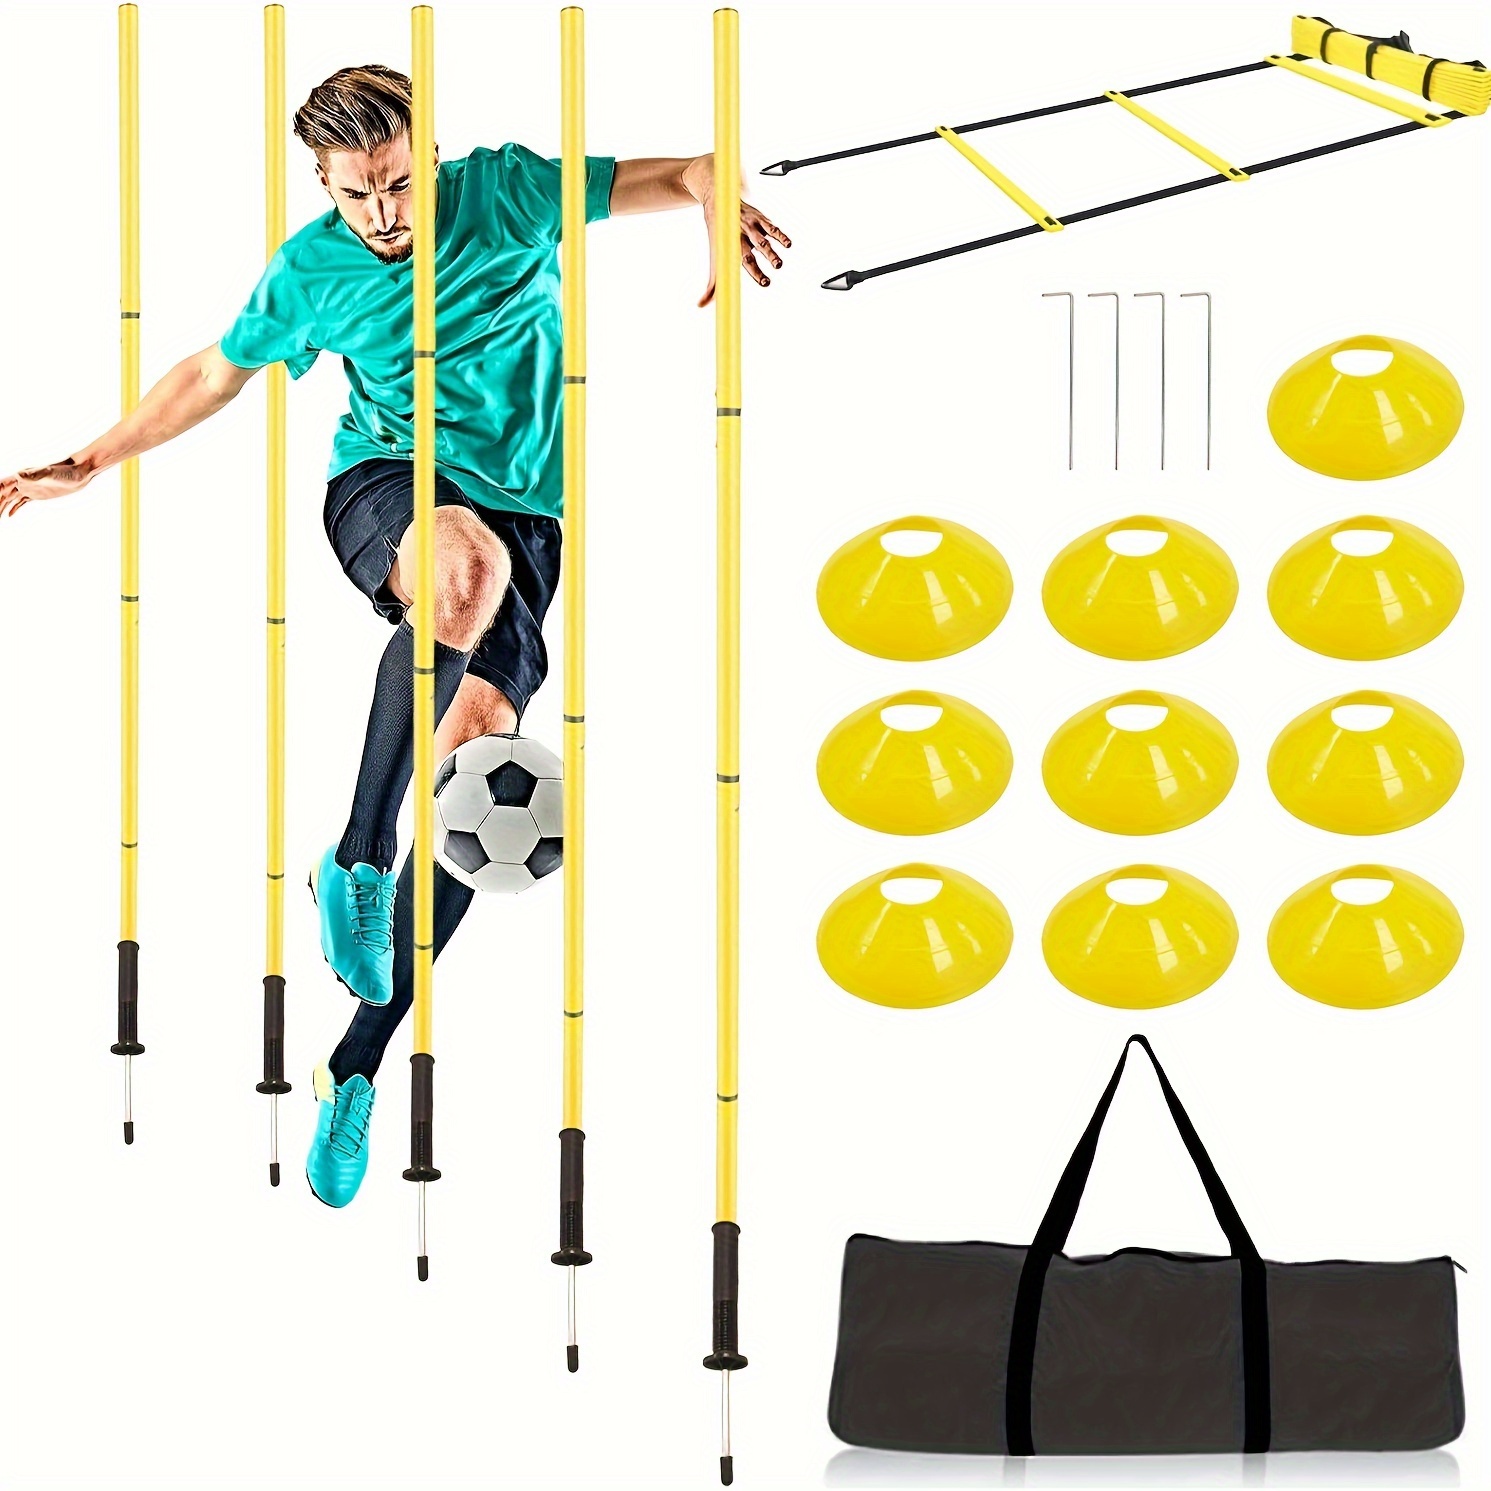 

Agility Training Pole Set, Soccer Training Equipment, Includes 6 Spring Soccer Plug-in Type Dribbling Pole, Agility Ladder, 10 Soccer Cones For Speed Training, Soccer Training, Basketball Athletes